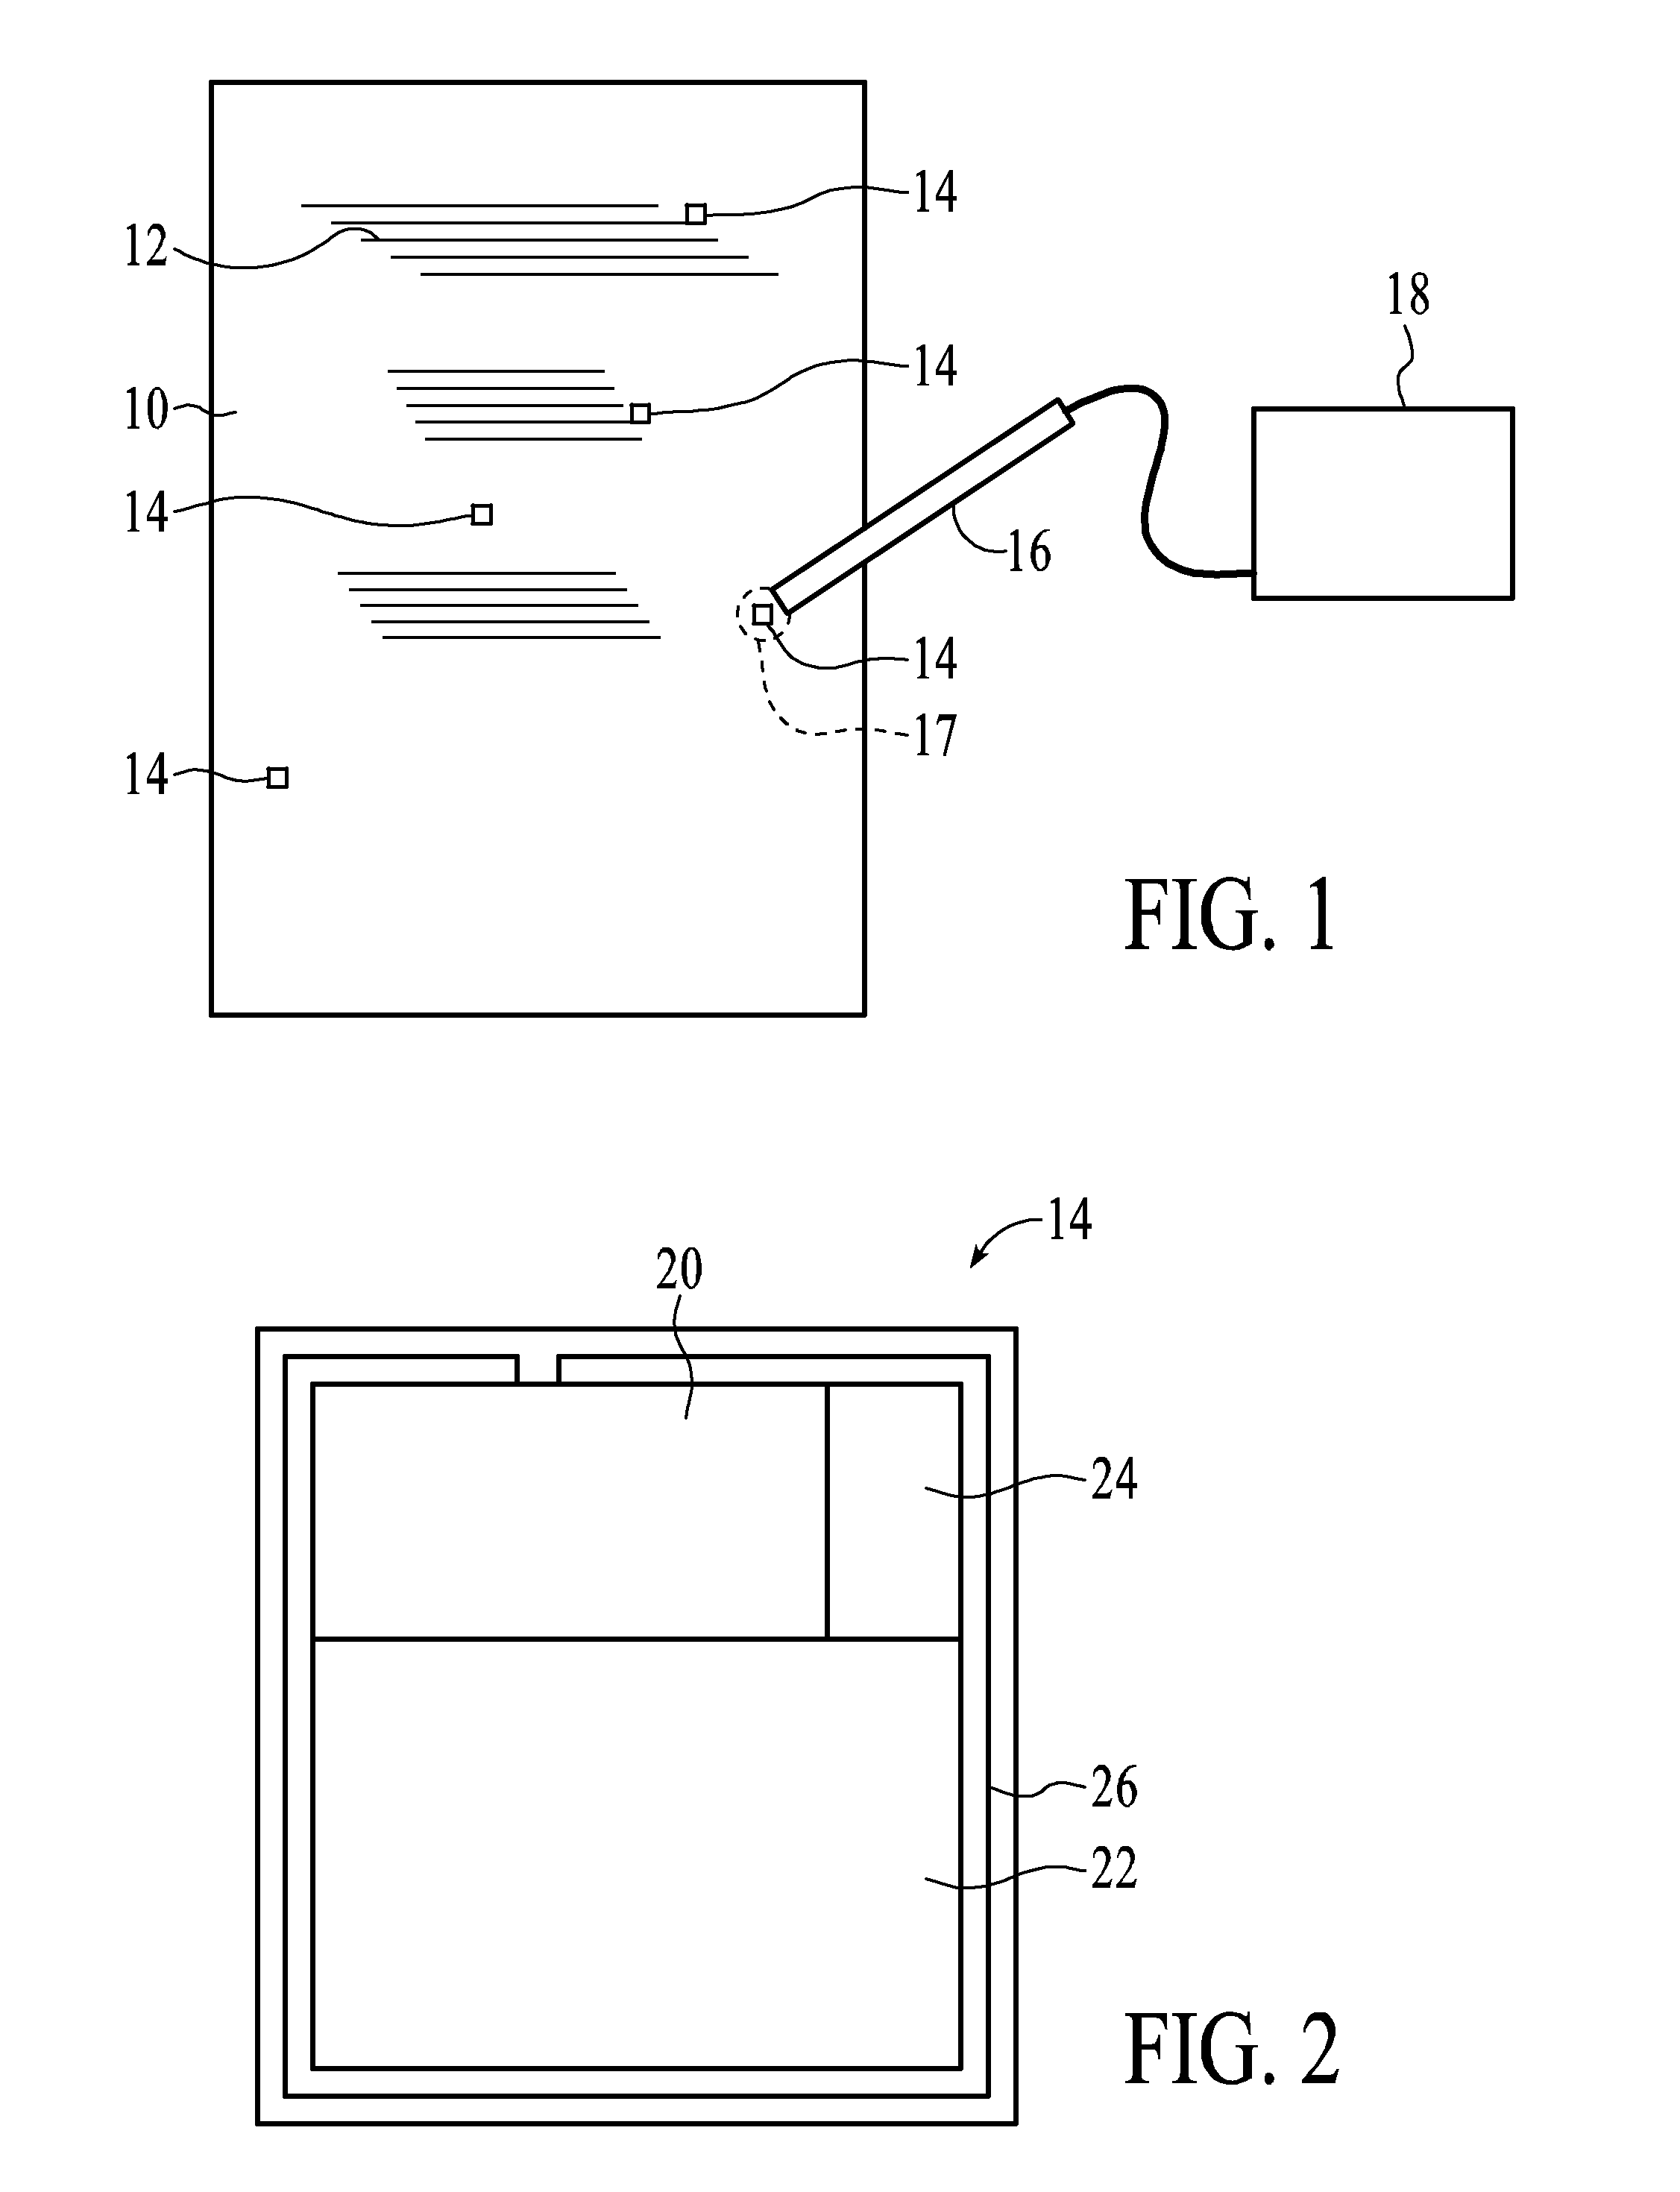 Physical representational objects with digital memory and methods of manufacture and use thereof